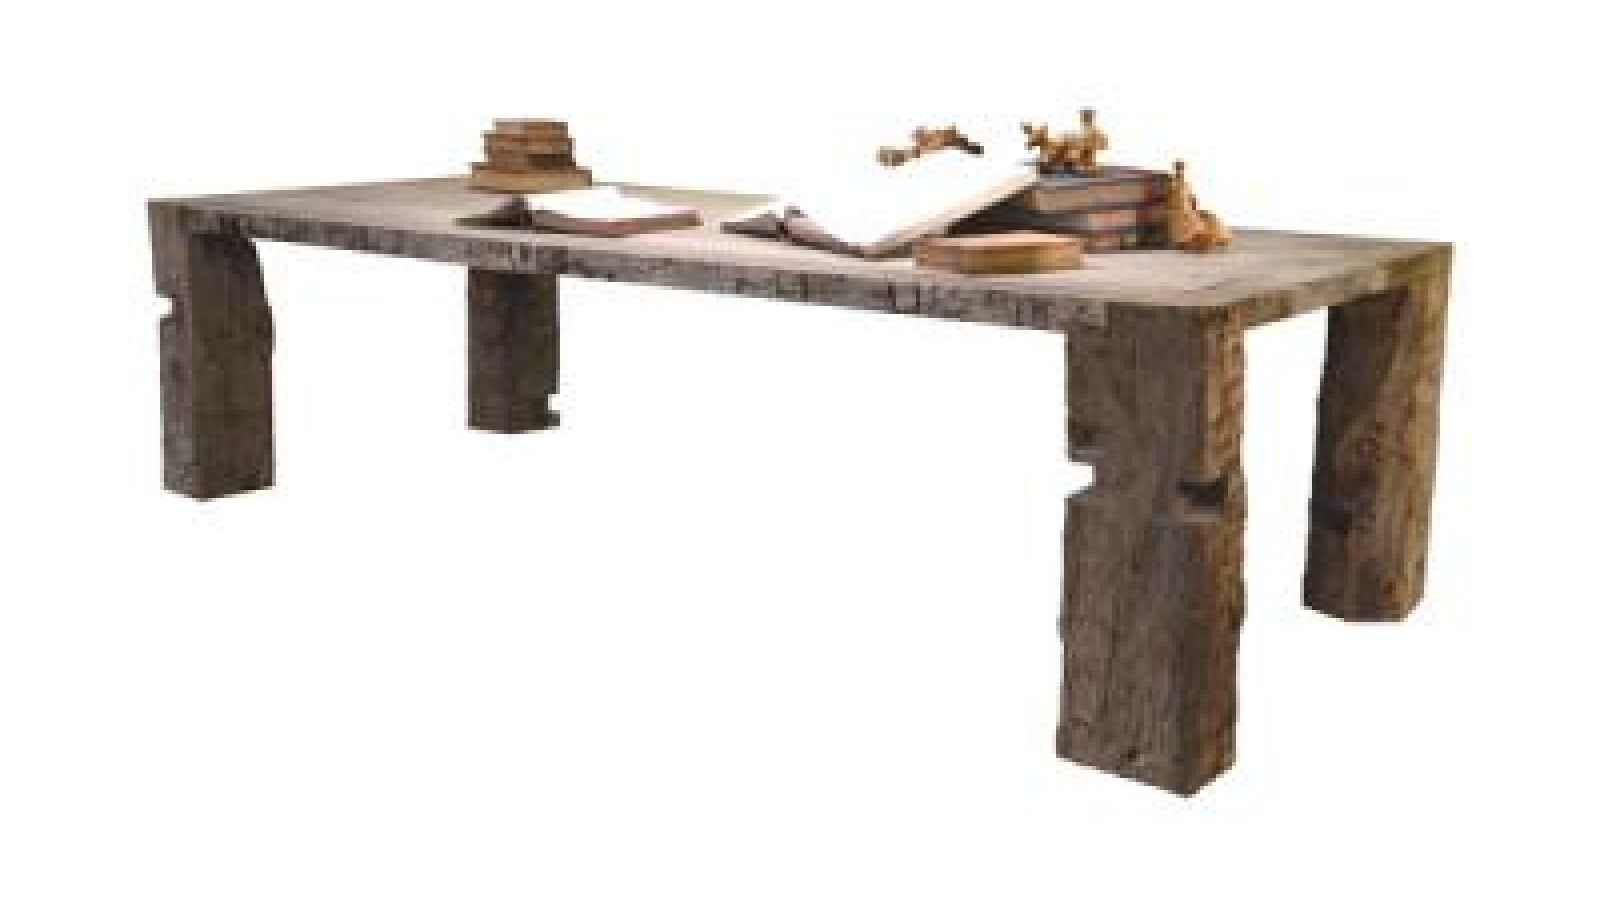 Rough Hewn Table